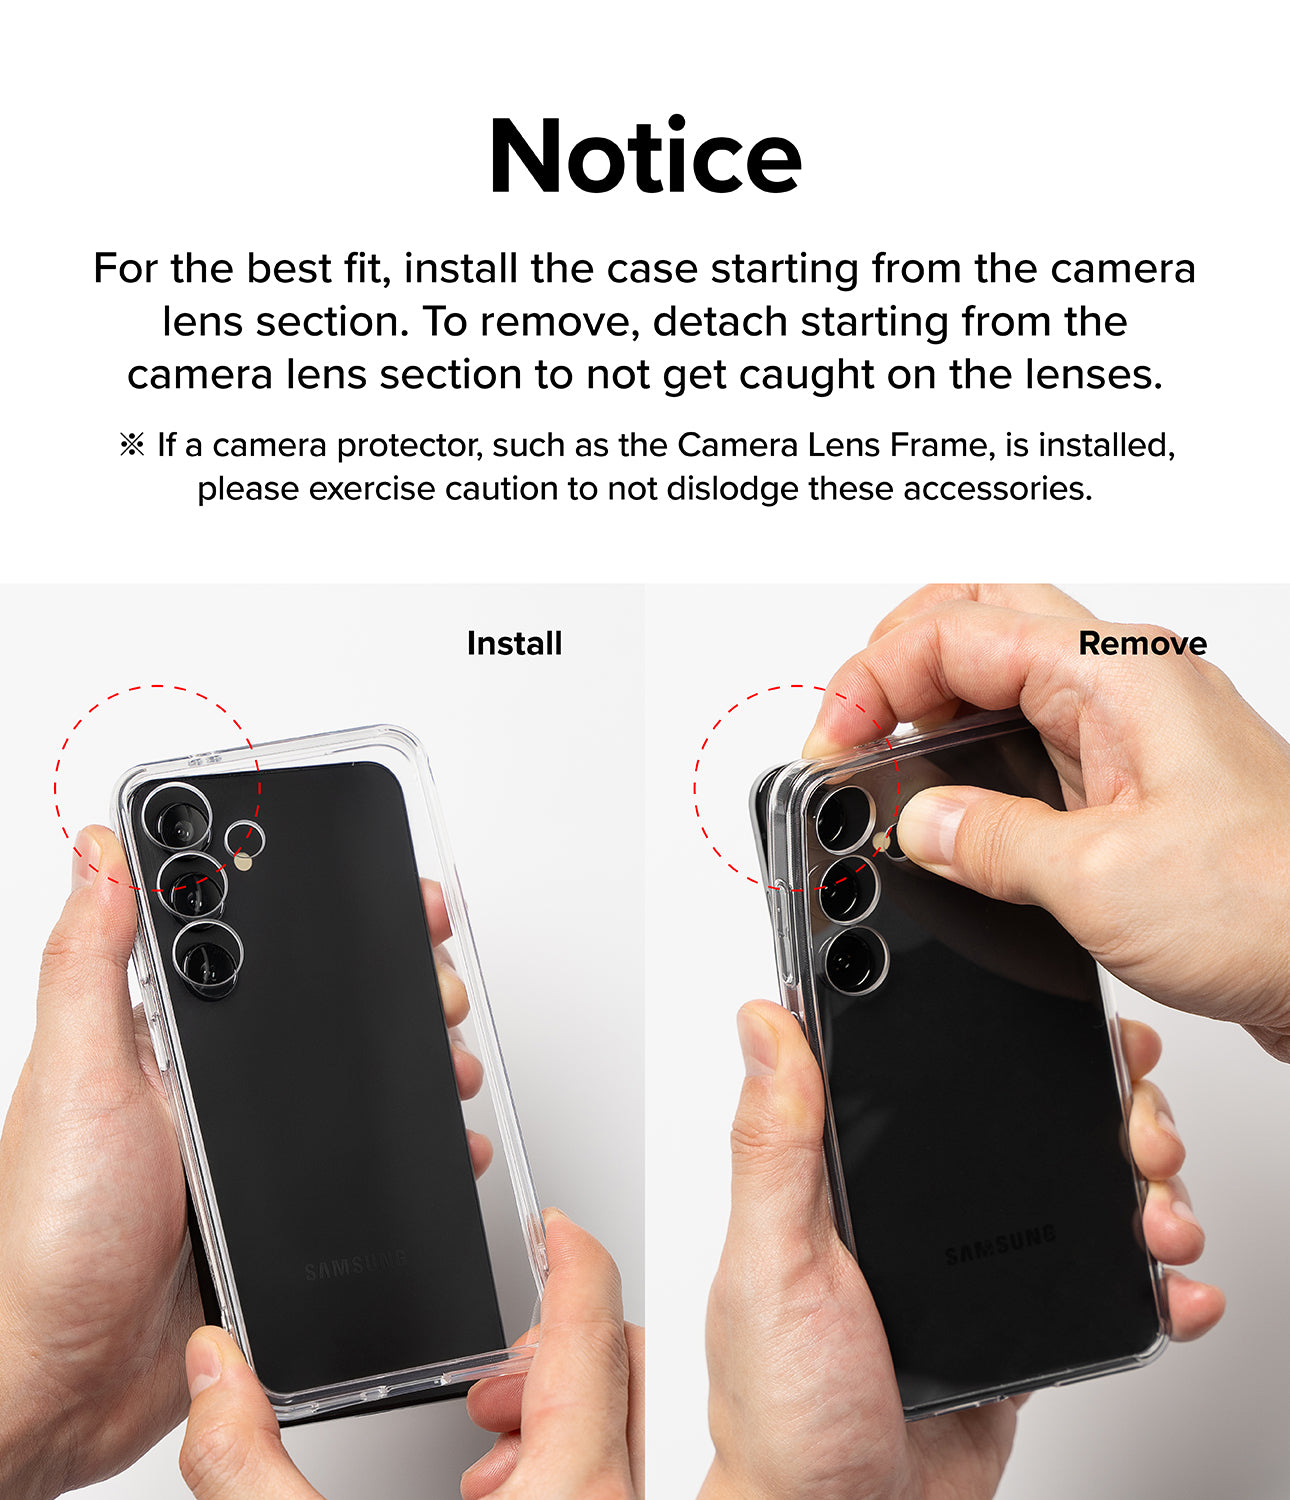 Galaxy S24 Plus Case | Onyx - Dark Green- Notice. For the best fit, install the case starting from the camera lens section. To remove, detach starting from the camera lens section to not get caught on the lenses.